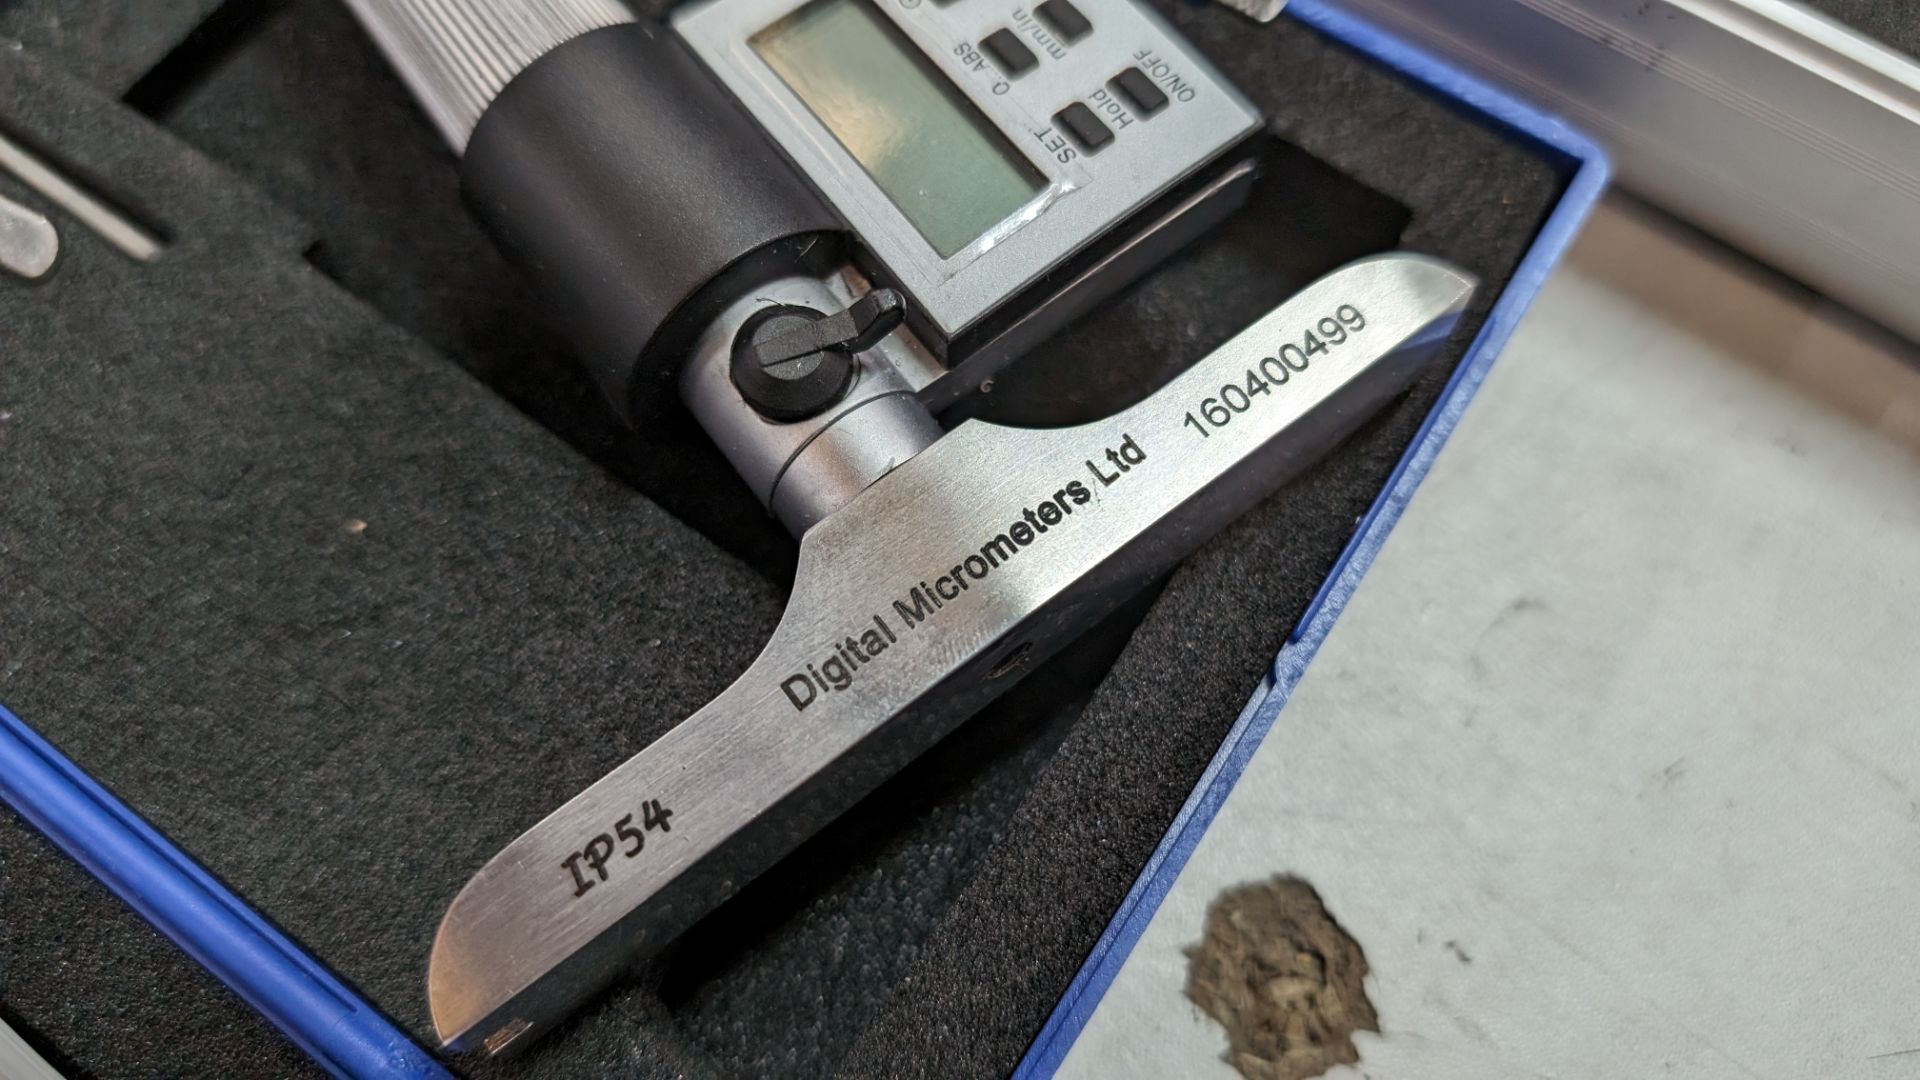 Digital/electronic micrometer in case - Image 3 of 12